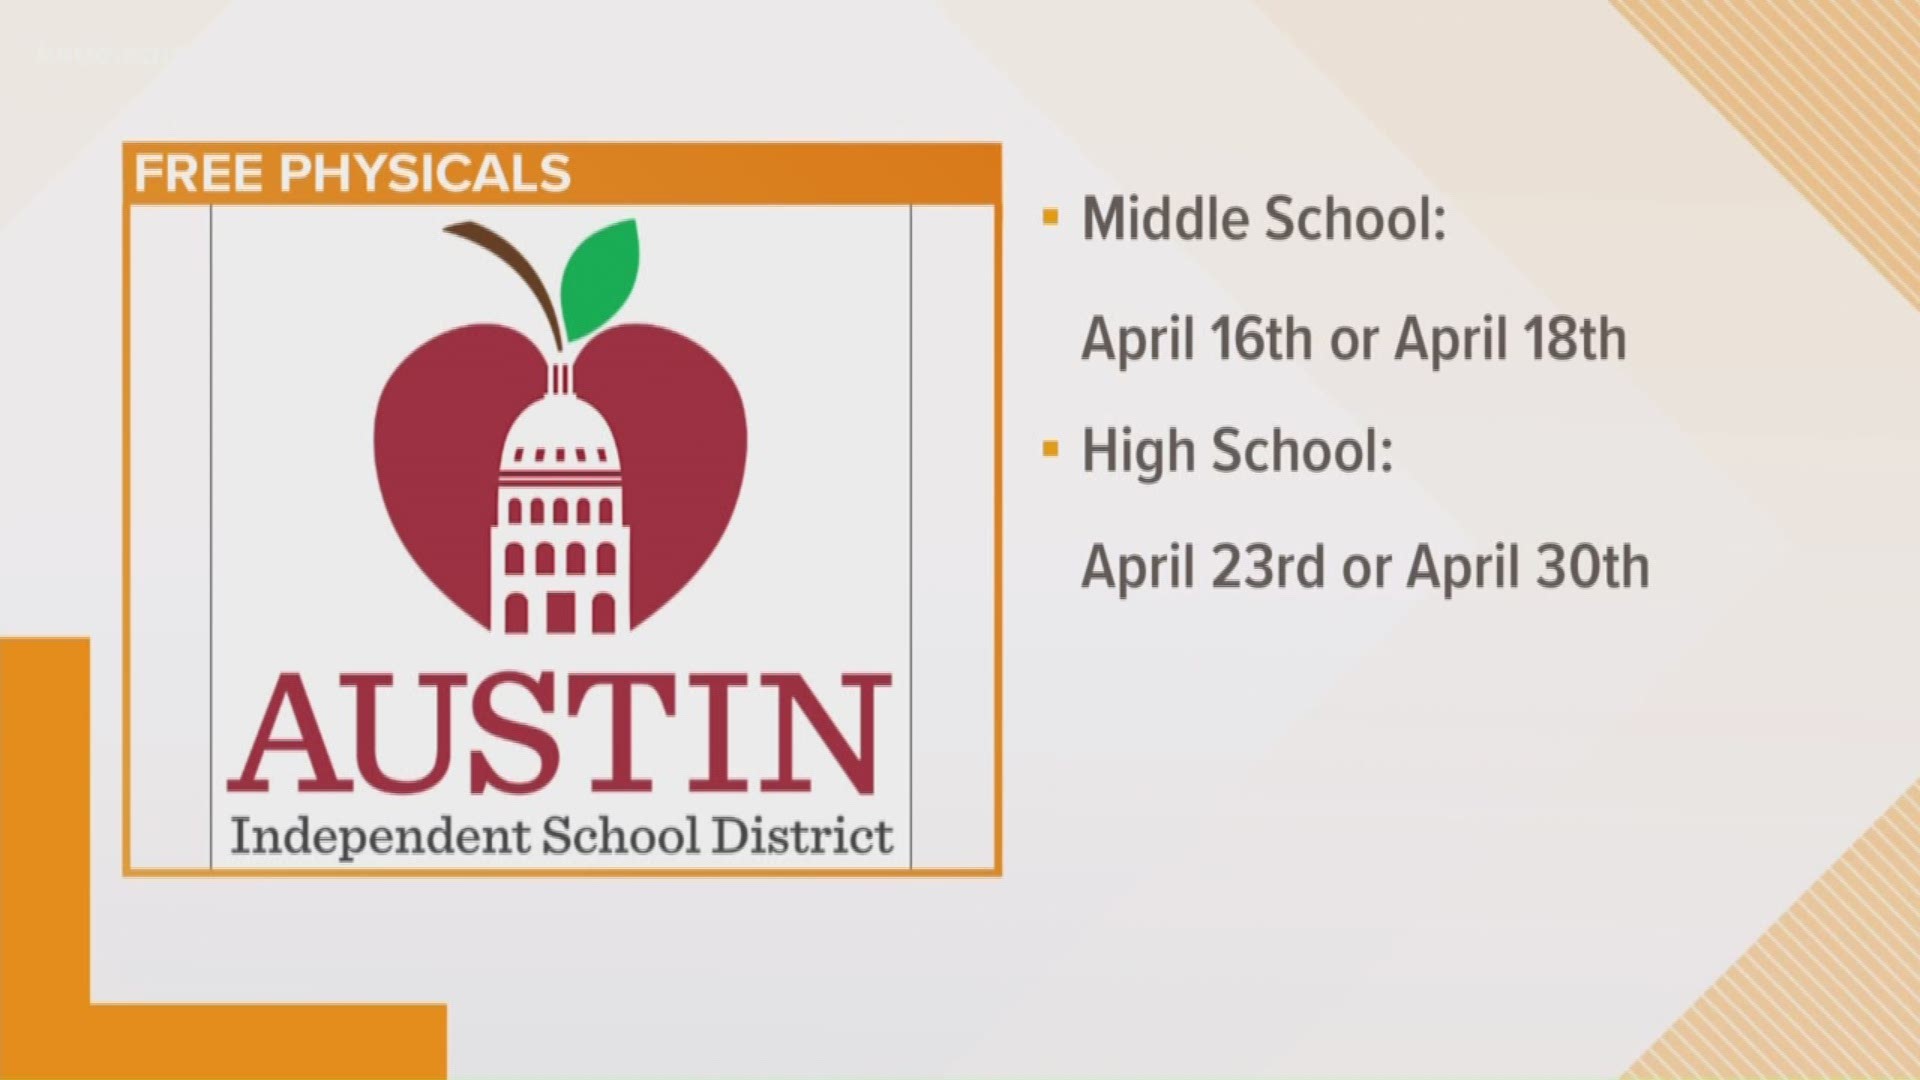 Some Austin ISD athletes will be able to get free physicals this week. Middle and high school students who plant to play sports or be in the marching band are required to get a physical.